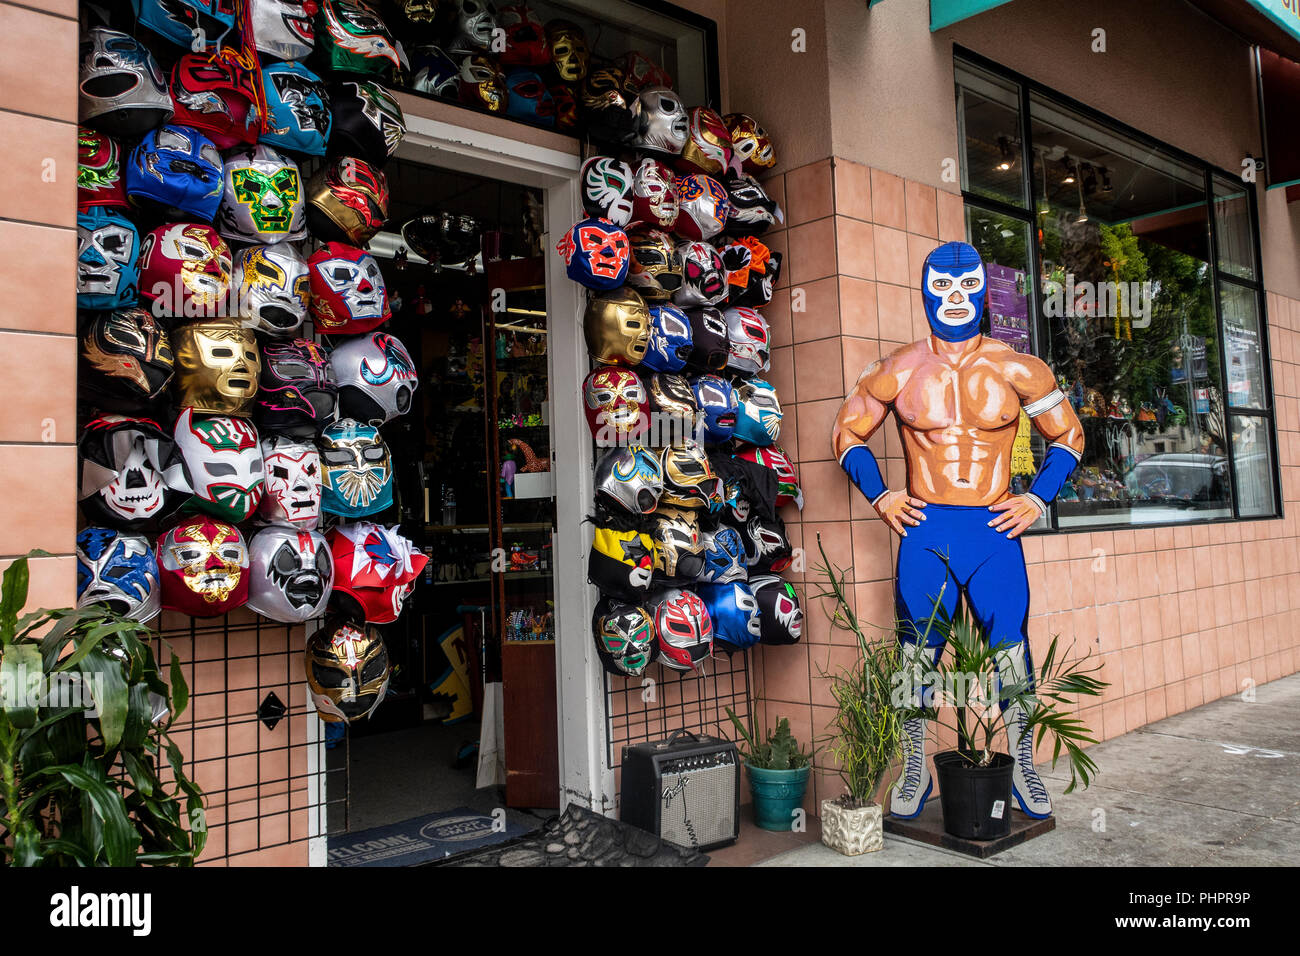 A shop selling Mexican wrestling masks in the Mission District of San Francisco, California. Stock Photo